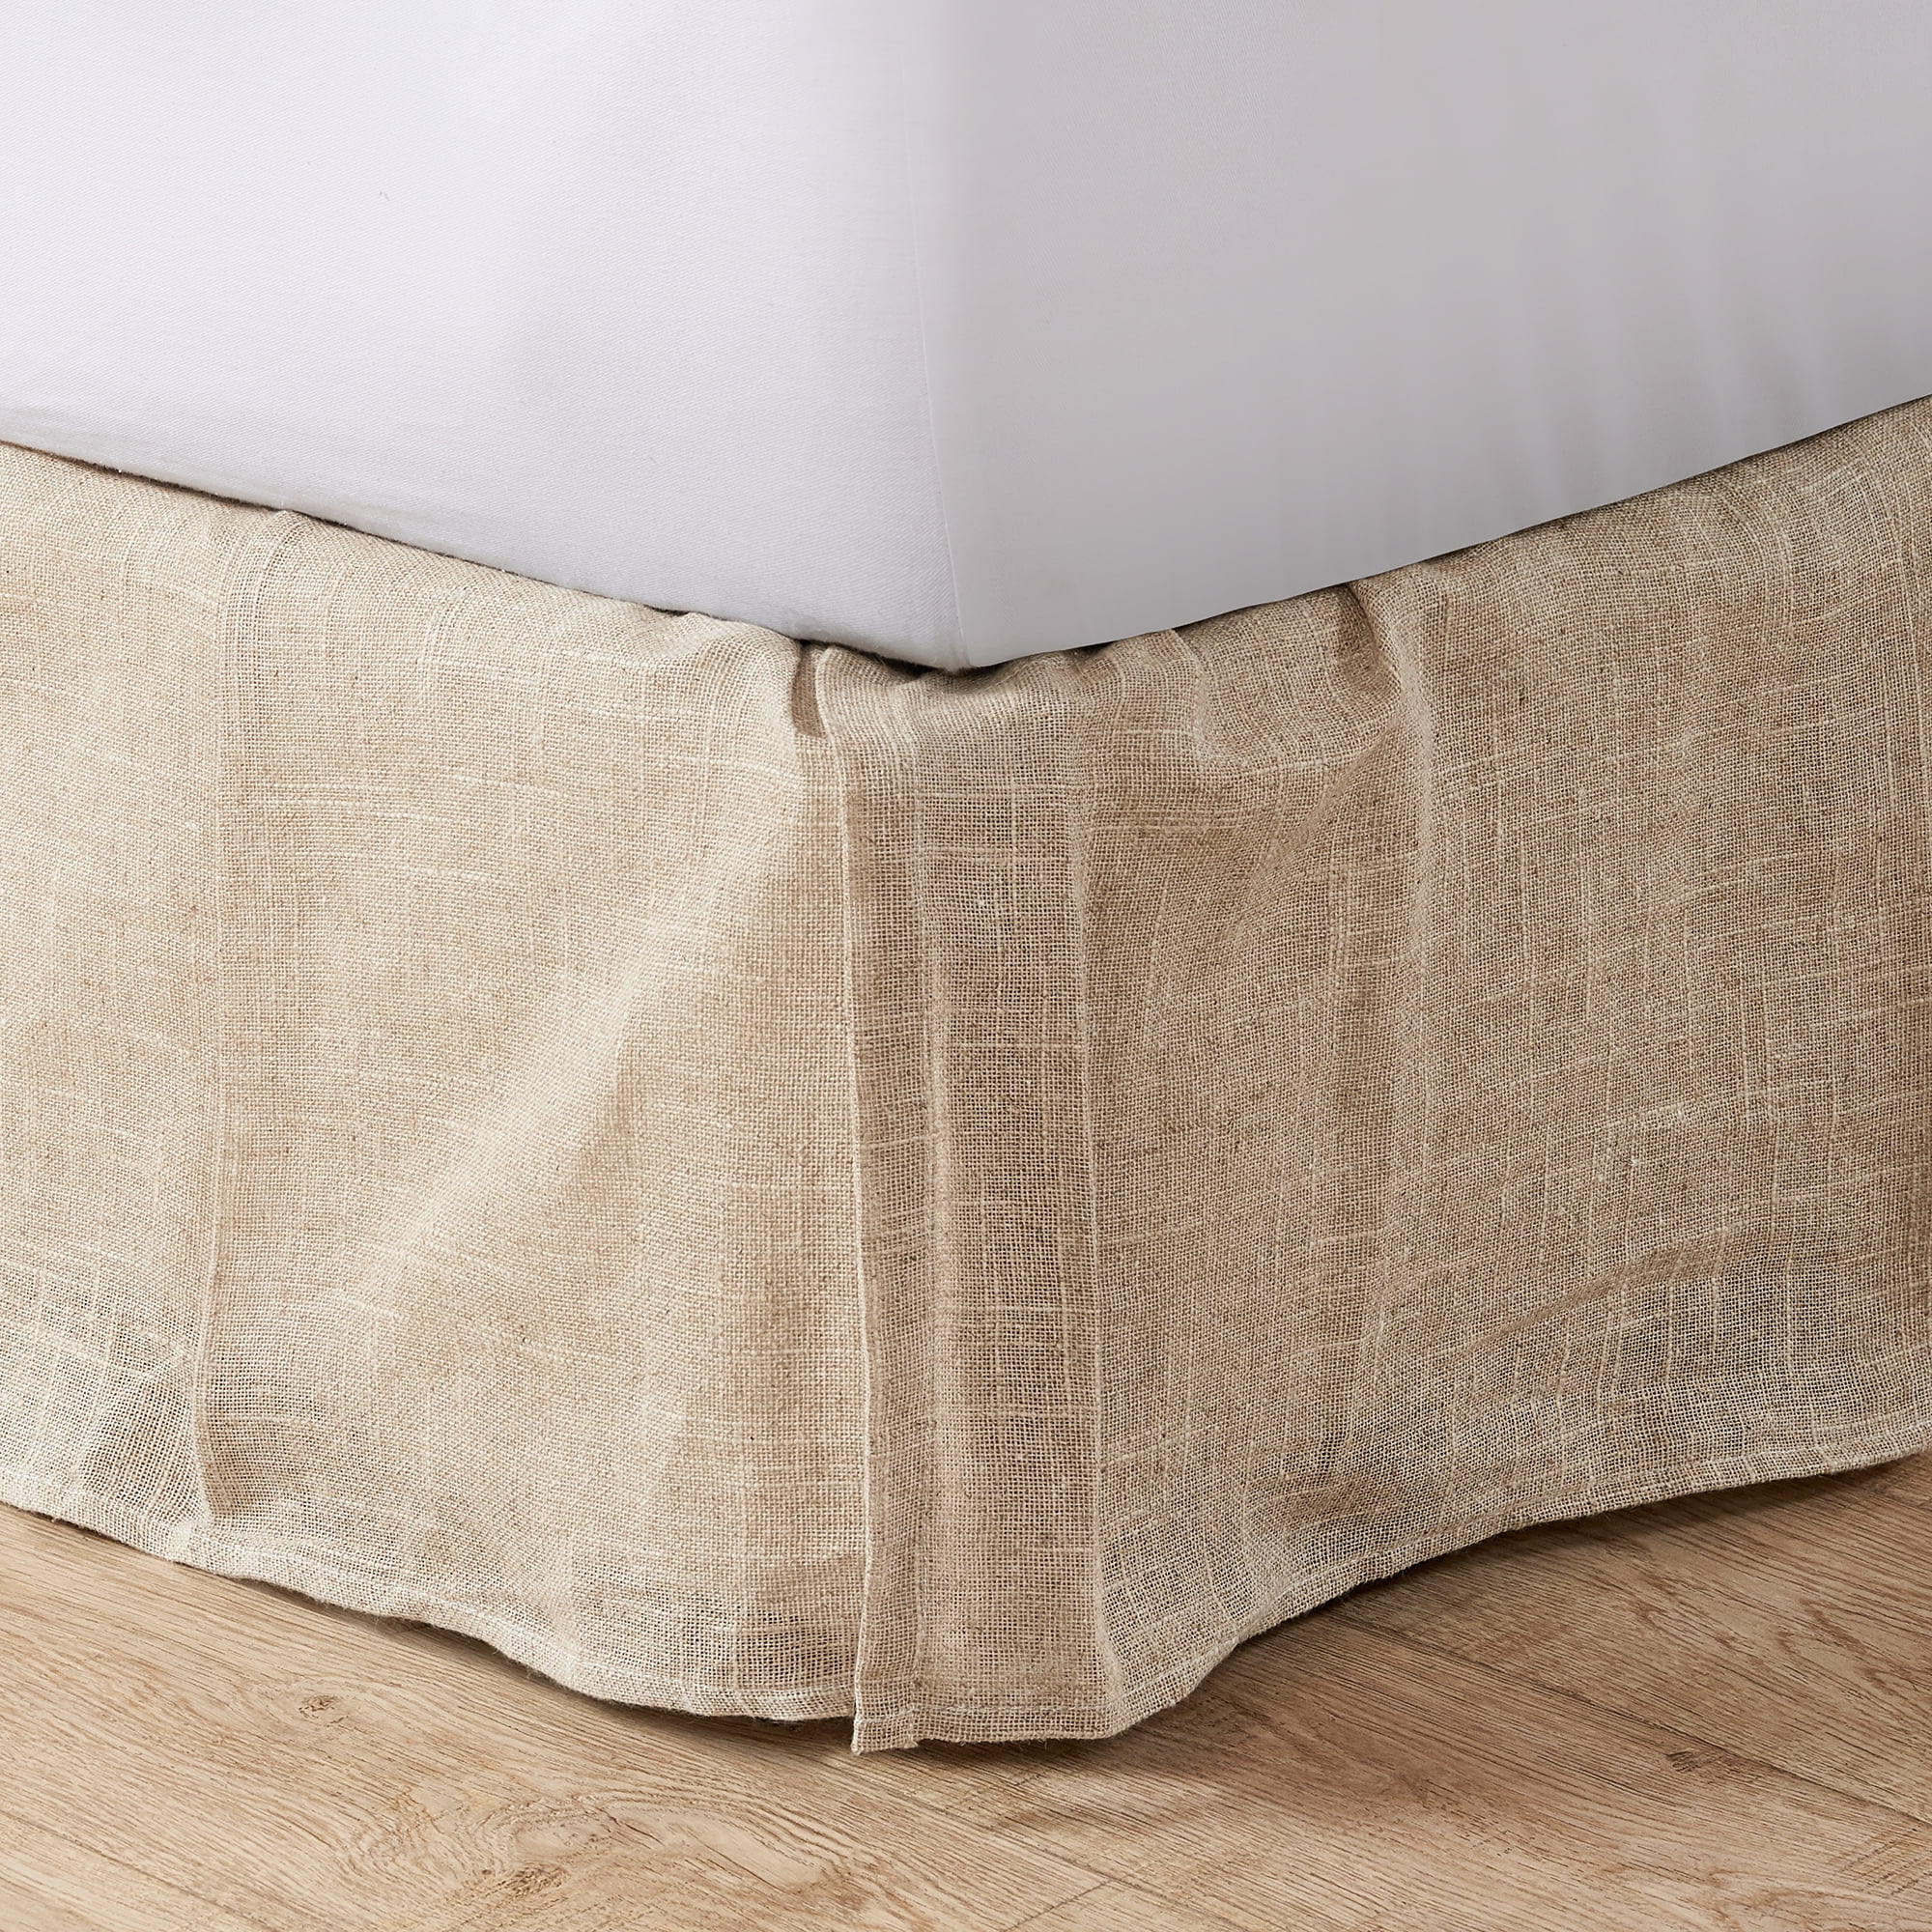 Nina Campbell by Levtex Home - Hessian - Euro Sham - Linen - Simple ...